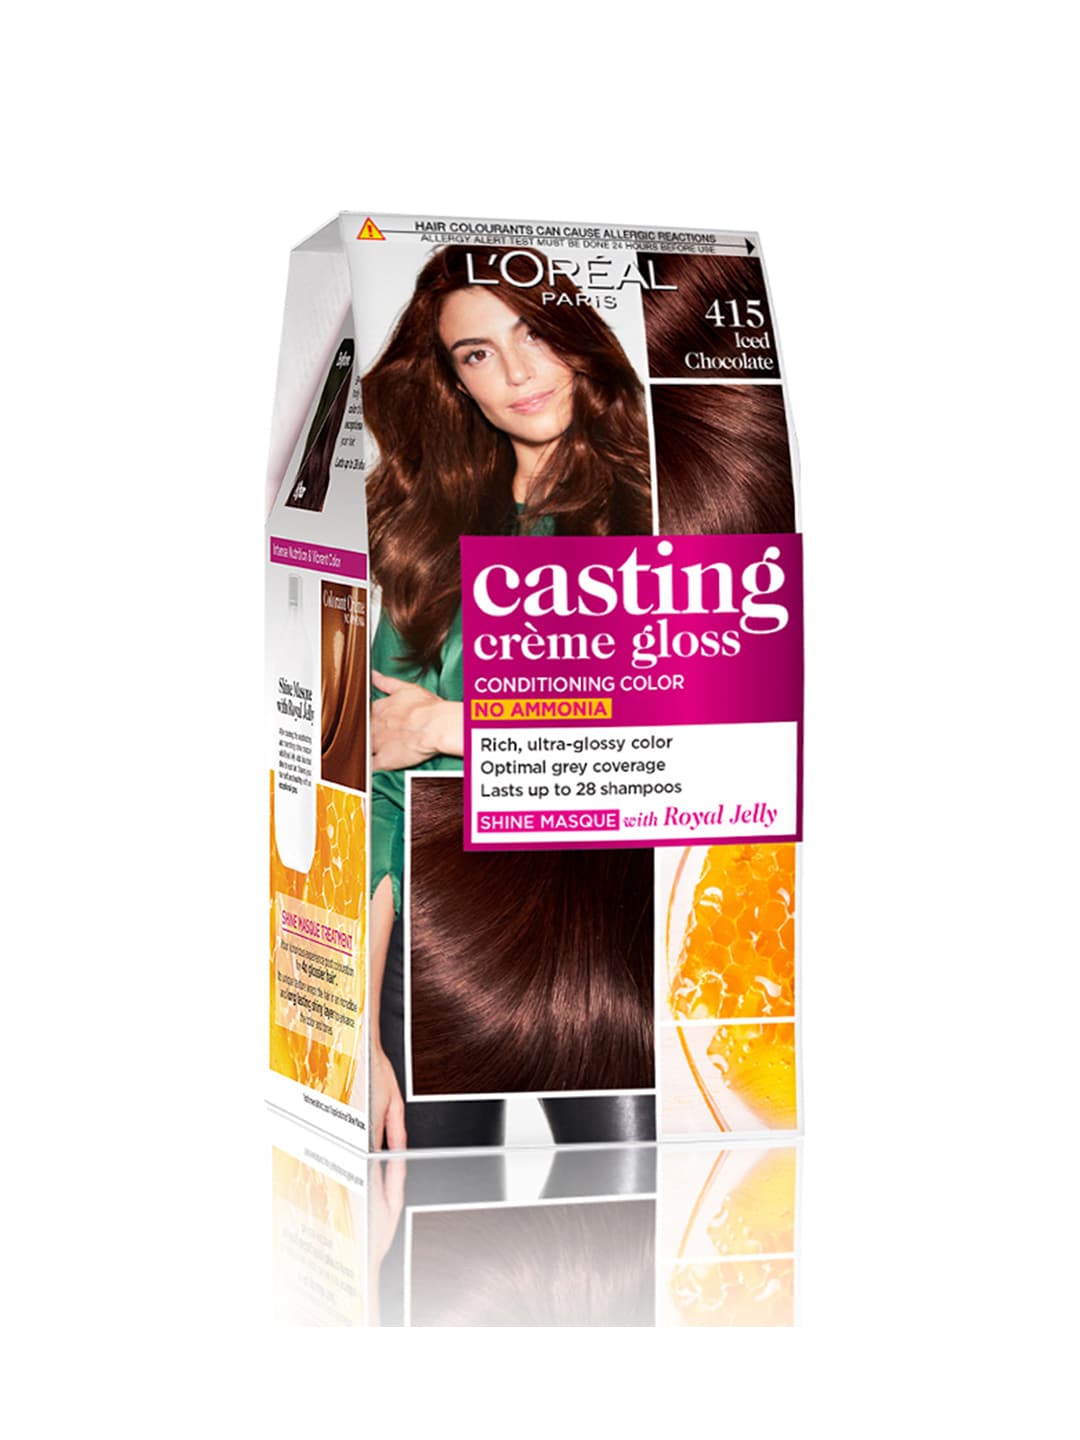 LOreal Paris Casting Creme Gloss Hair Color - Iced Chocolate 415 87.5 g + 72 ml Price in India